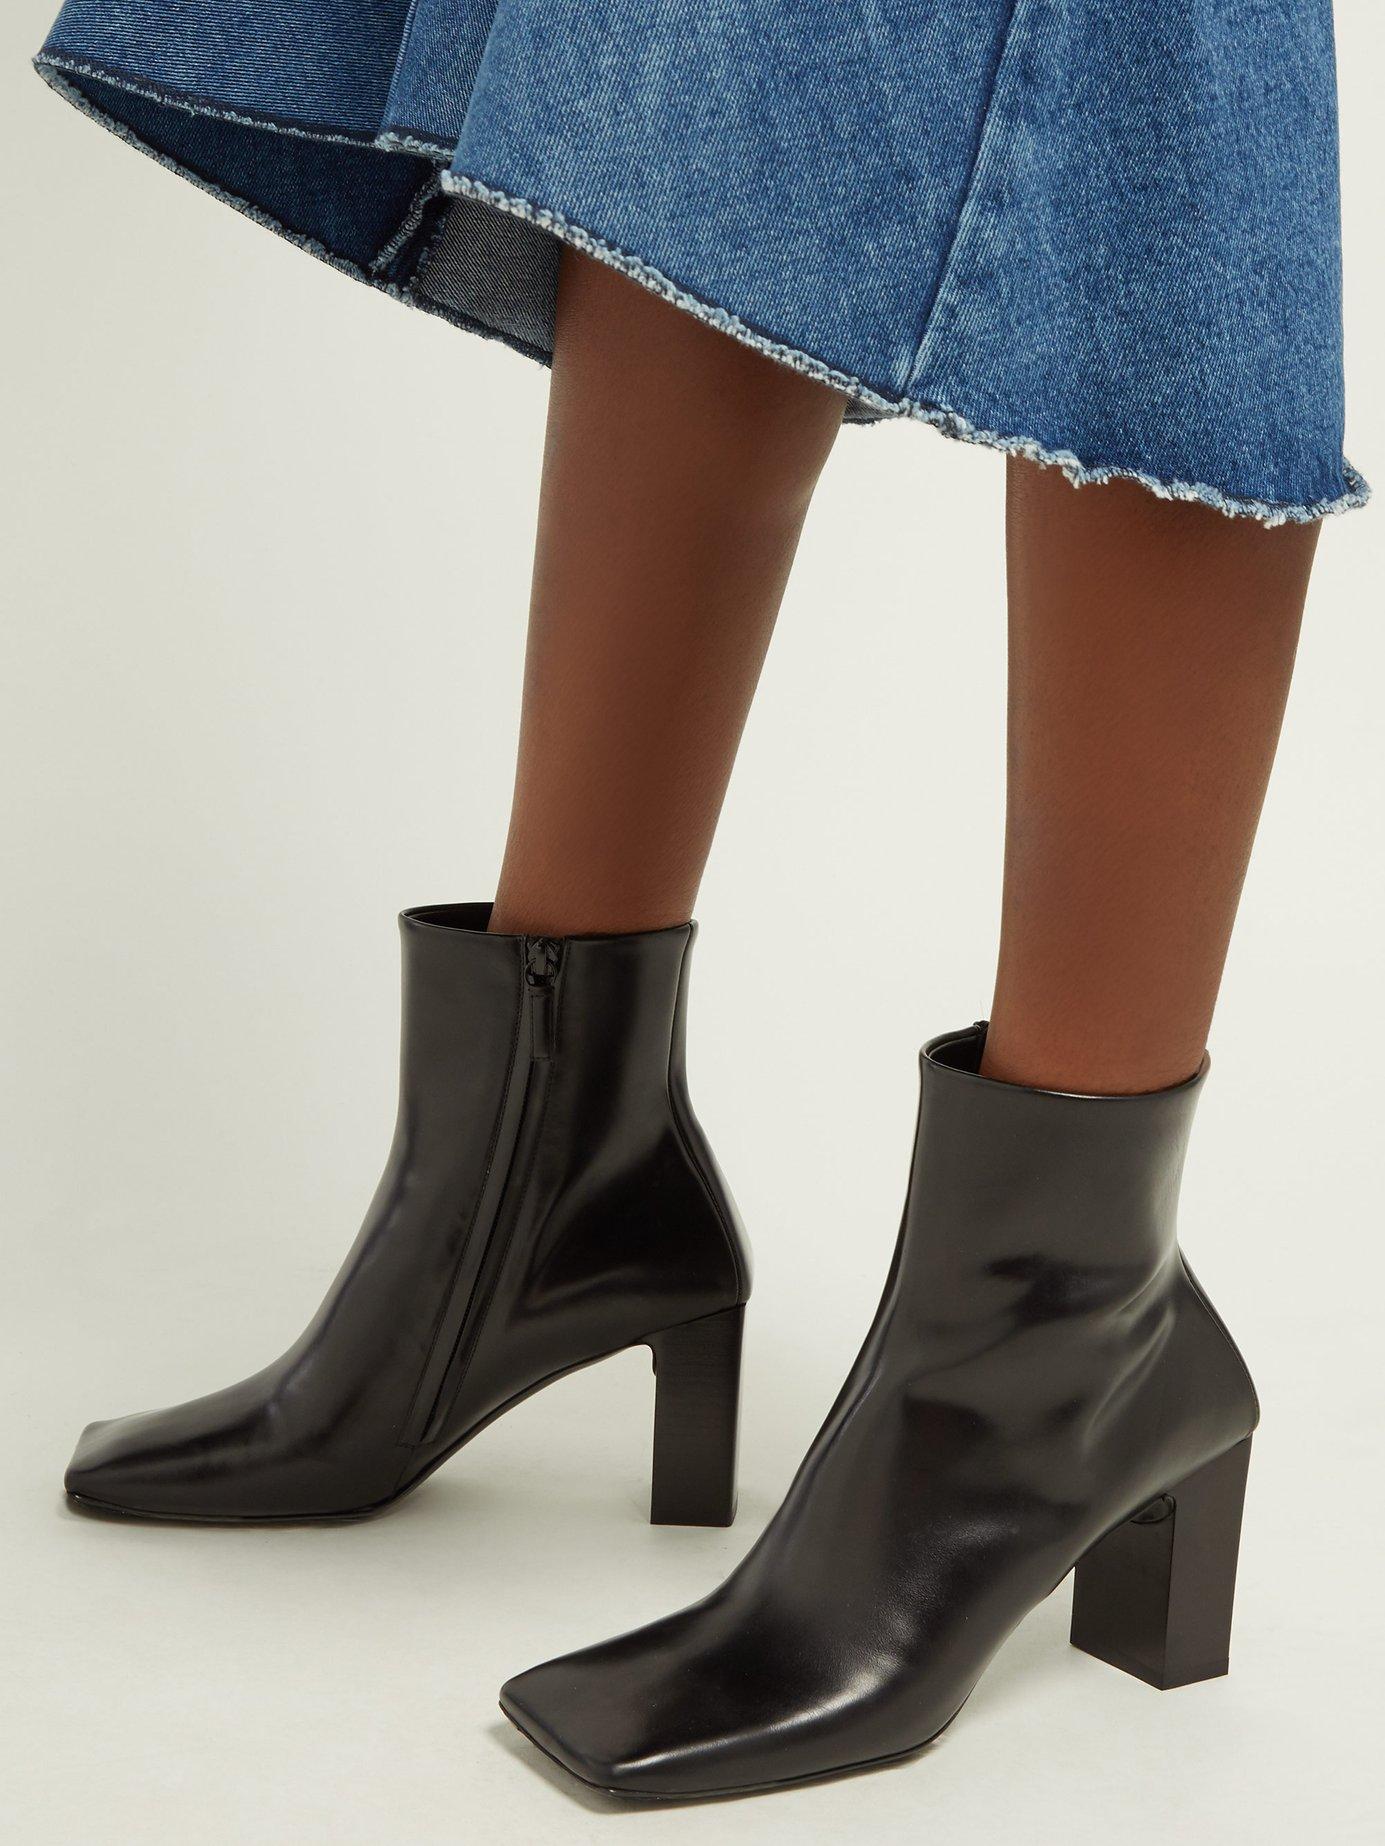 Balenciaga Double Square Block Heel Leather Boots in Black | Lyst